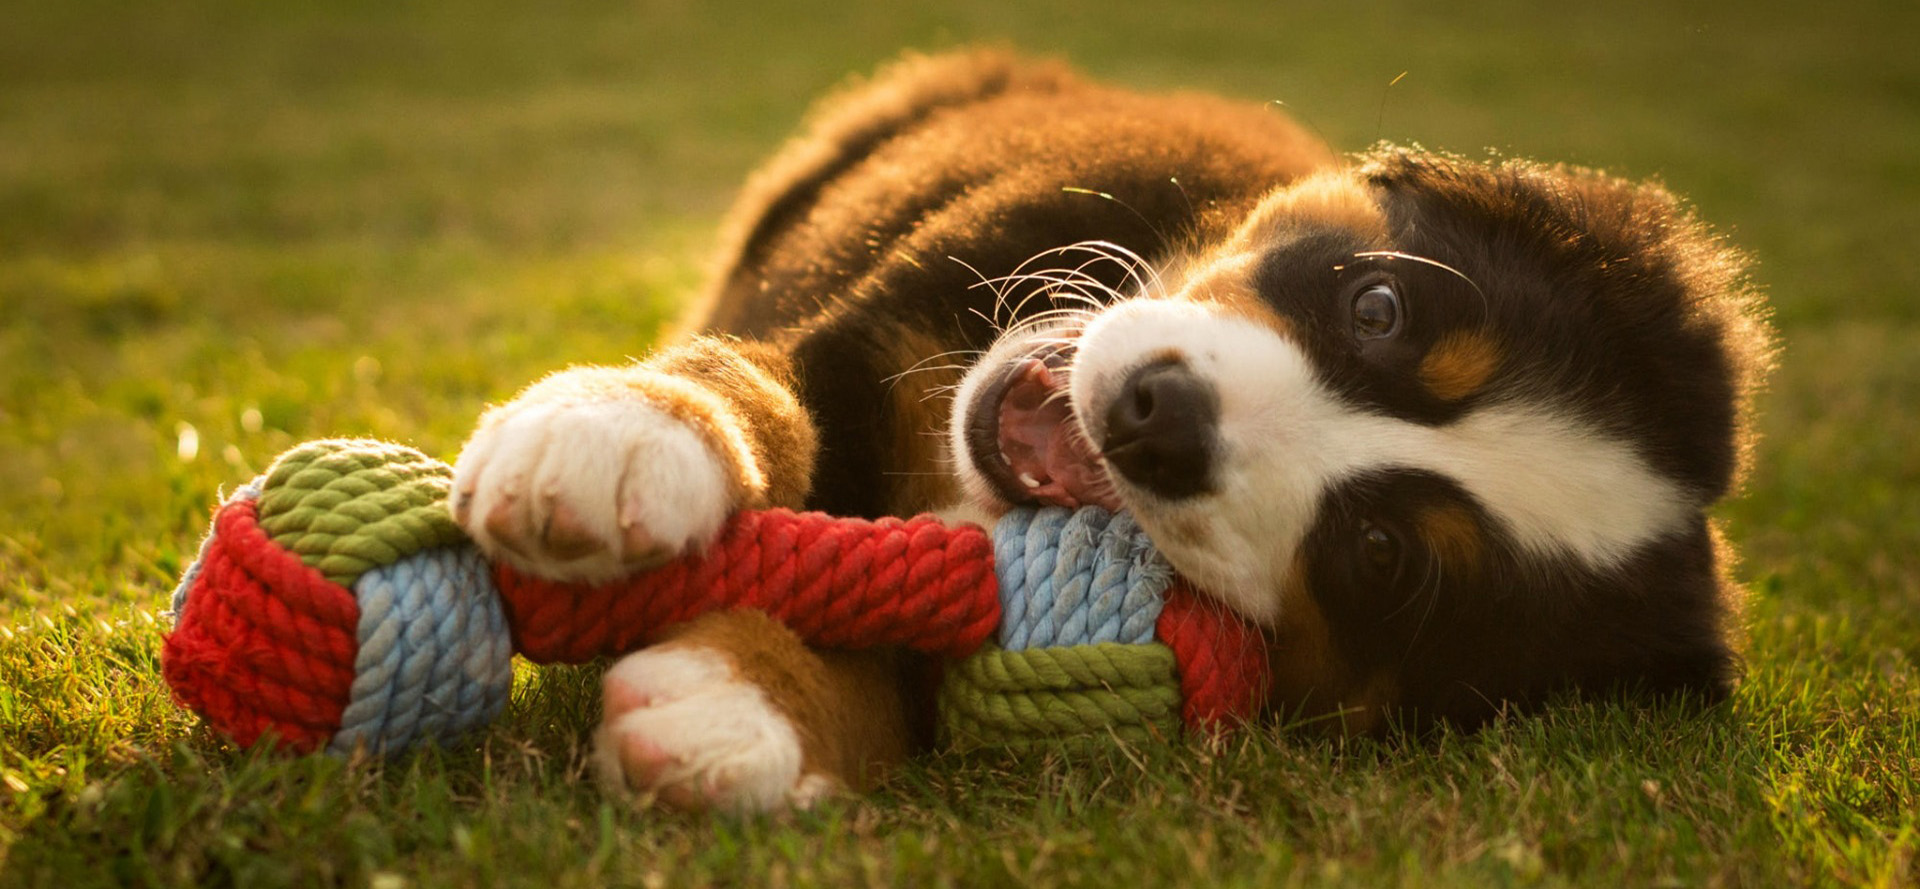 Dog playing with a toy.